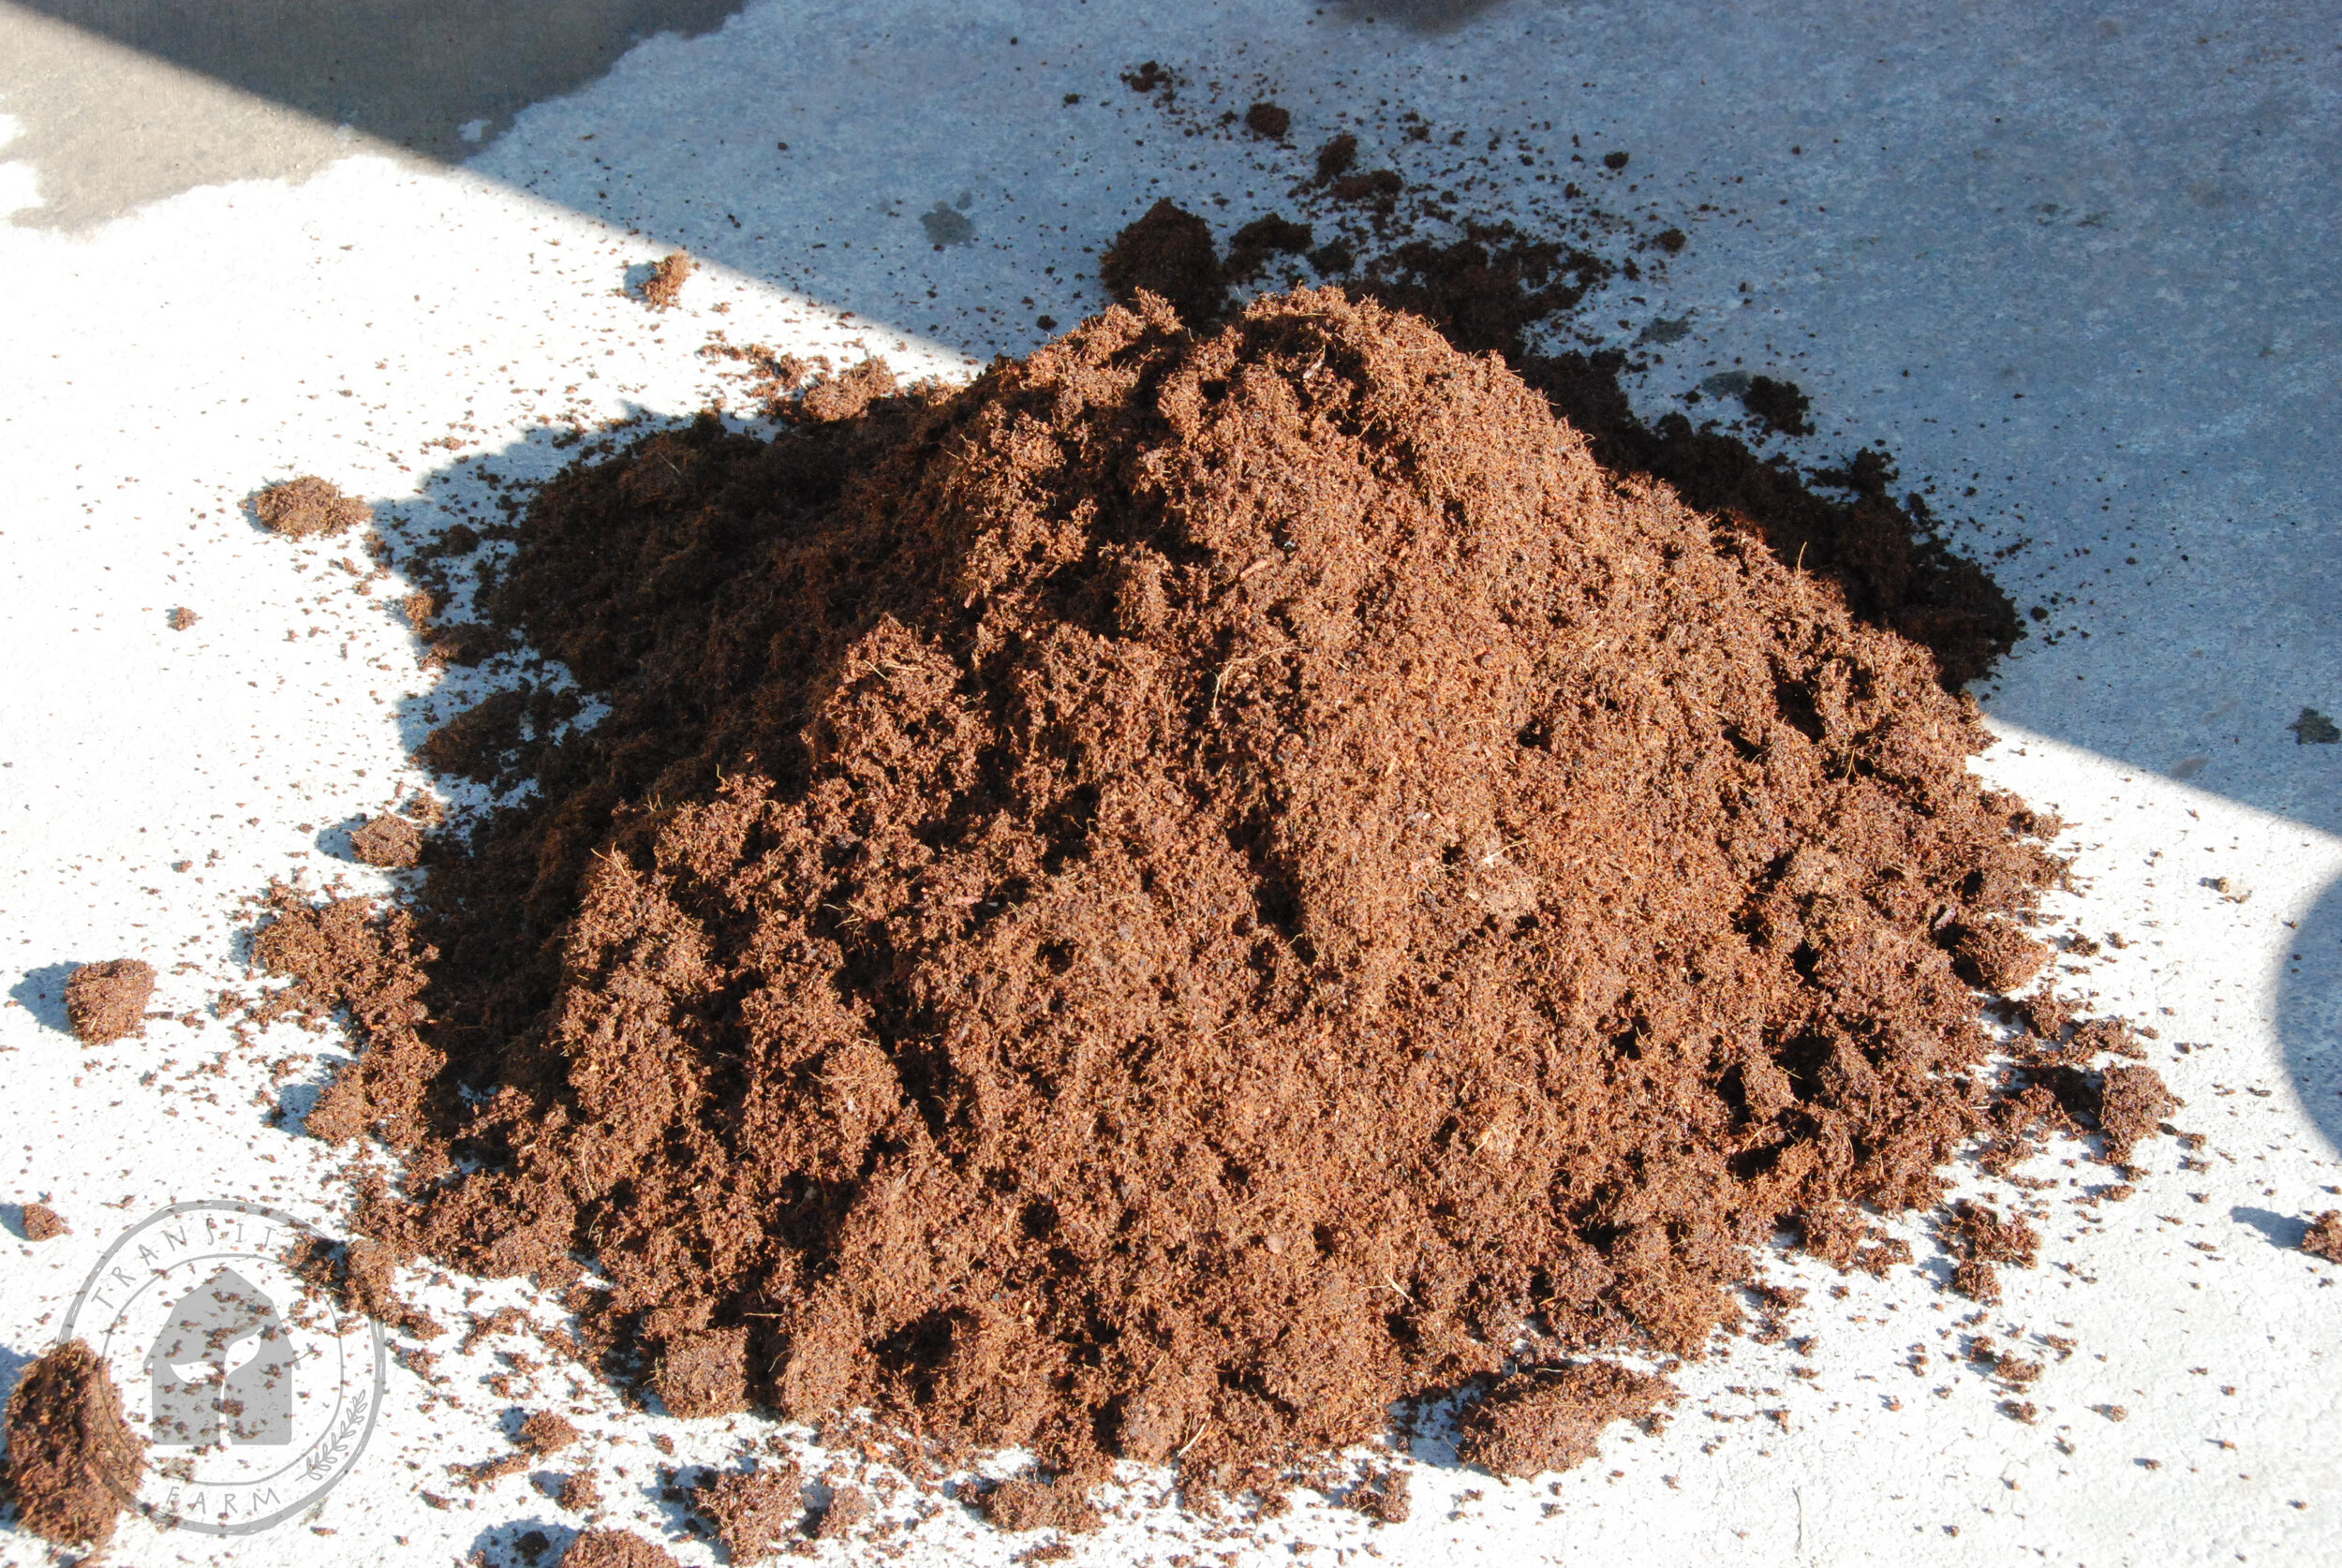   Fill 2 buckets with Coco Peat or Coir and dump on clean concrete pad.  